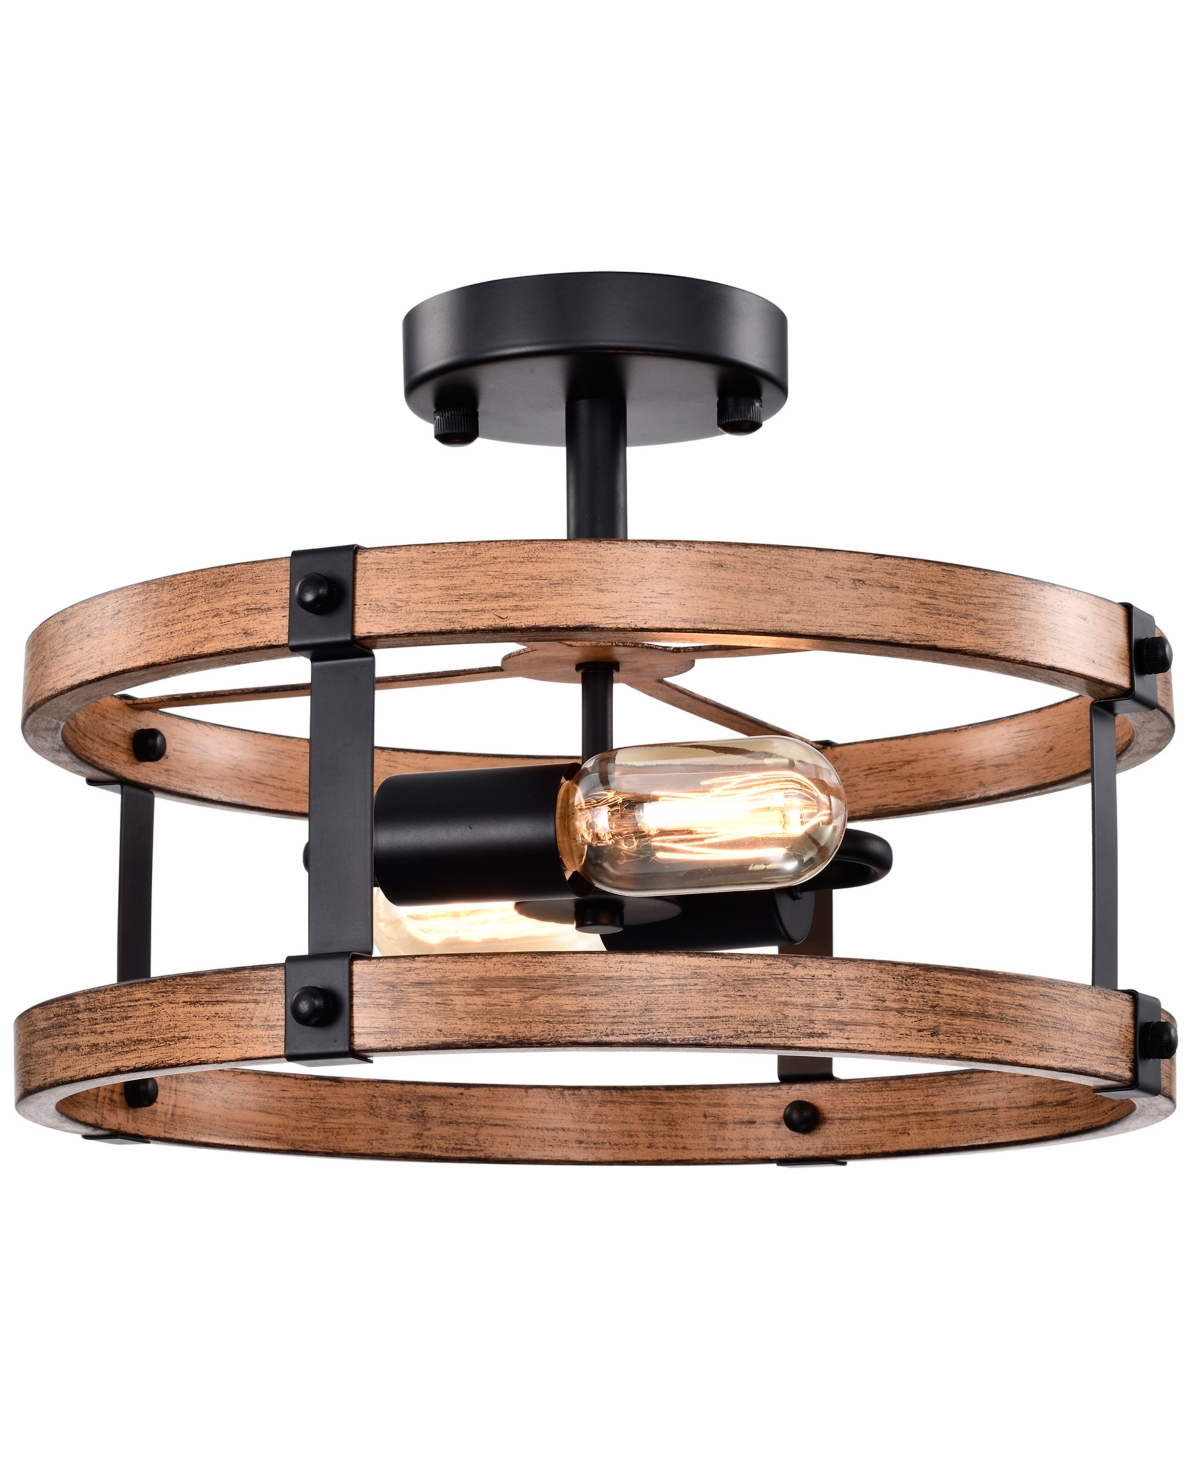 Home Accessories Deyan 14" Indoor Finish Semi-flush Mount Ceiling Light With Light Kit In Matte Black And Faux Wood Grain